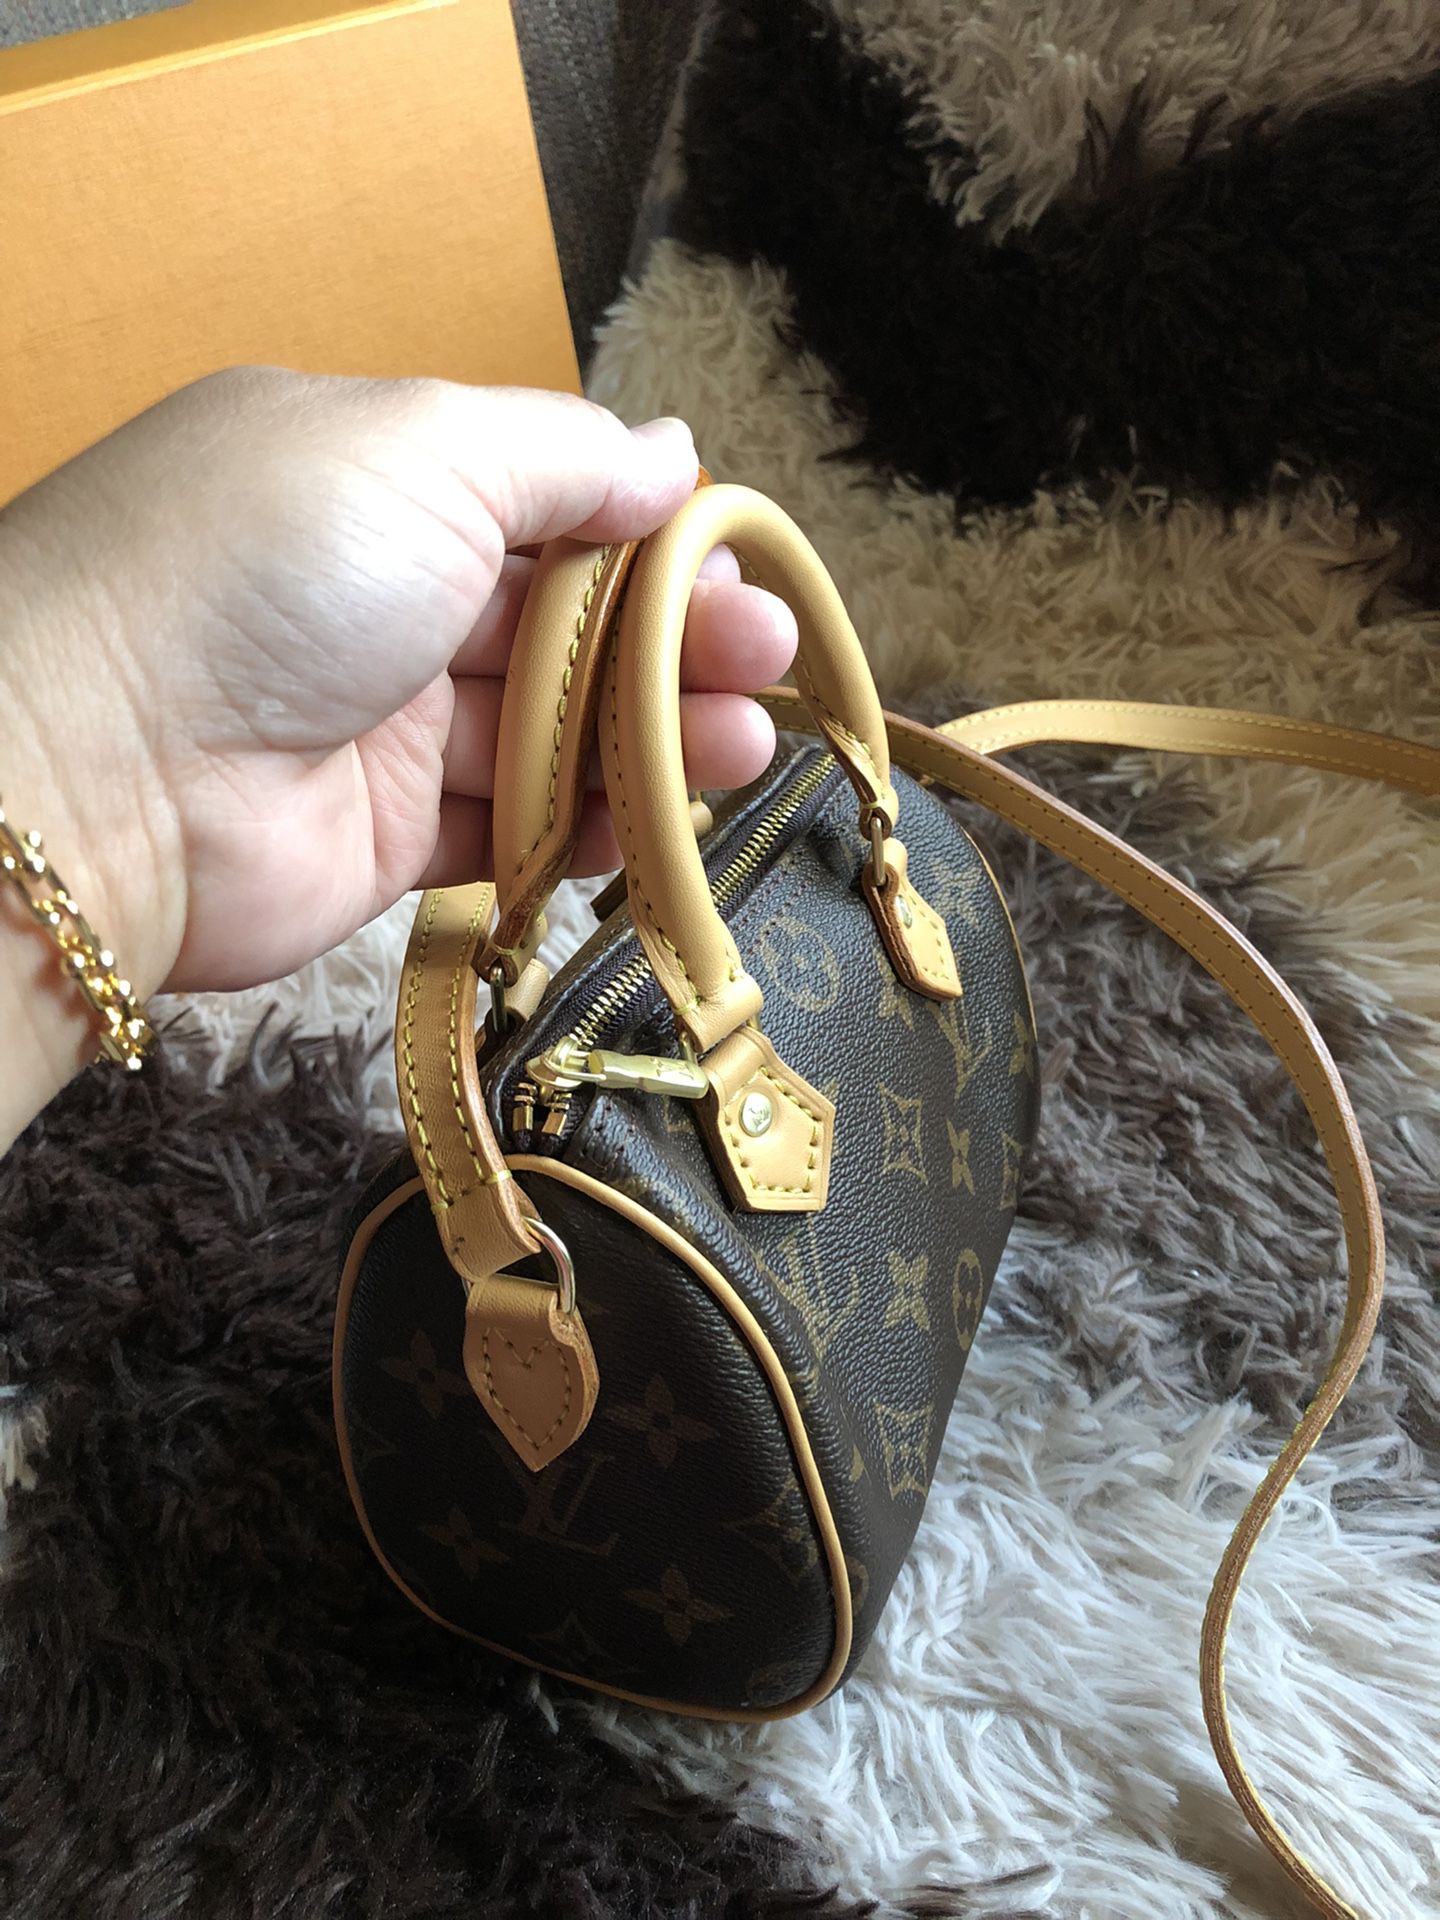 Speedy Nano Upcycle From Authentic LV Bag for Sale in Hollywood